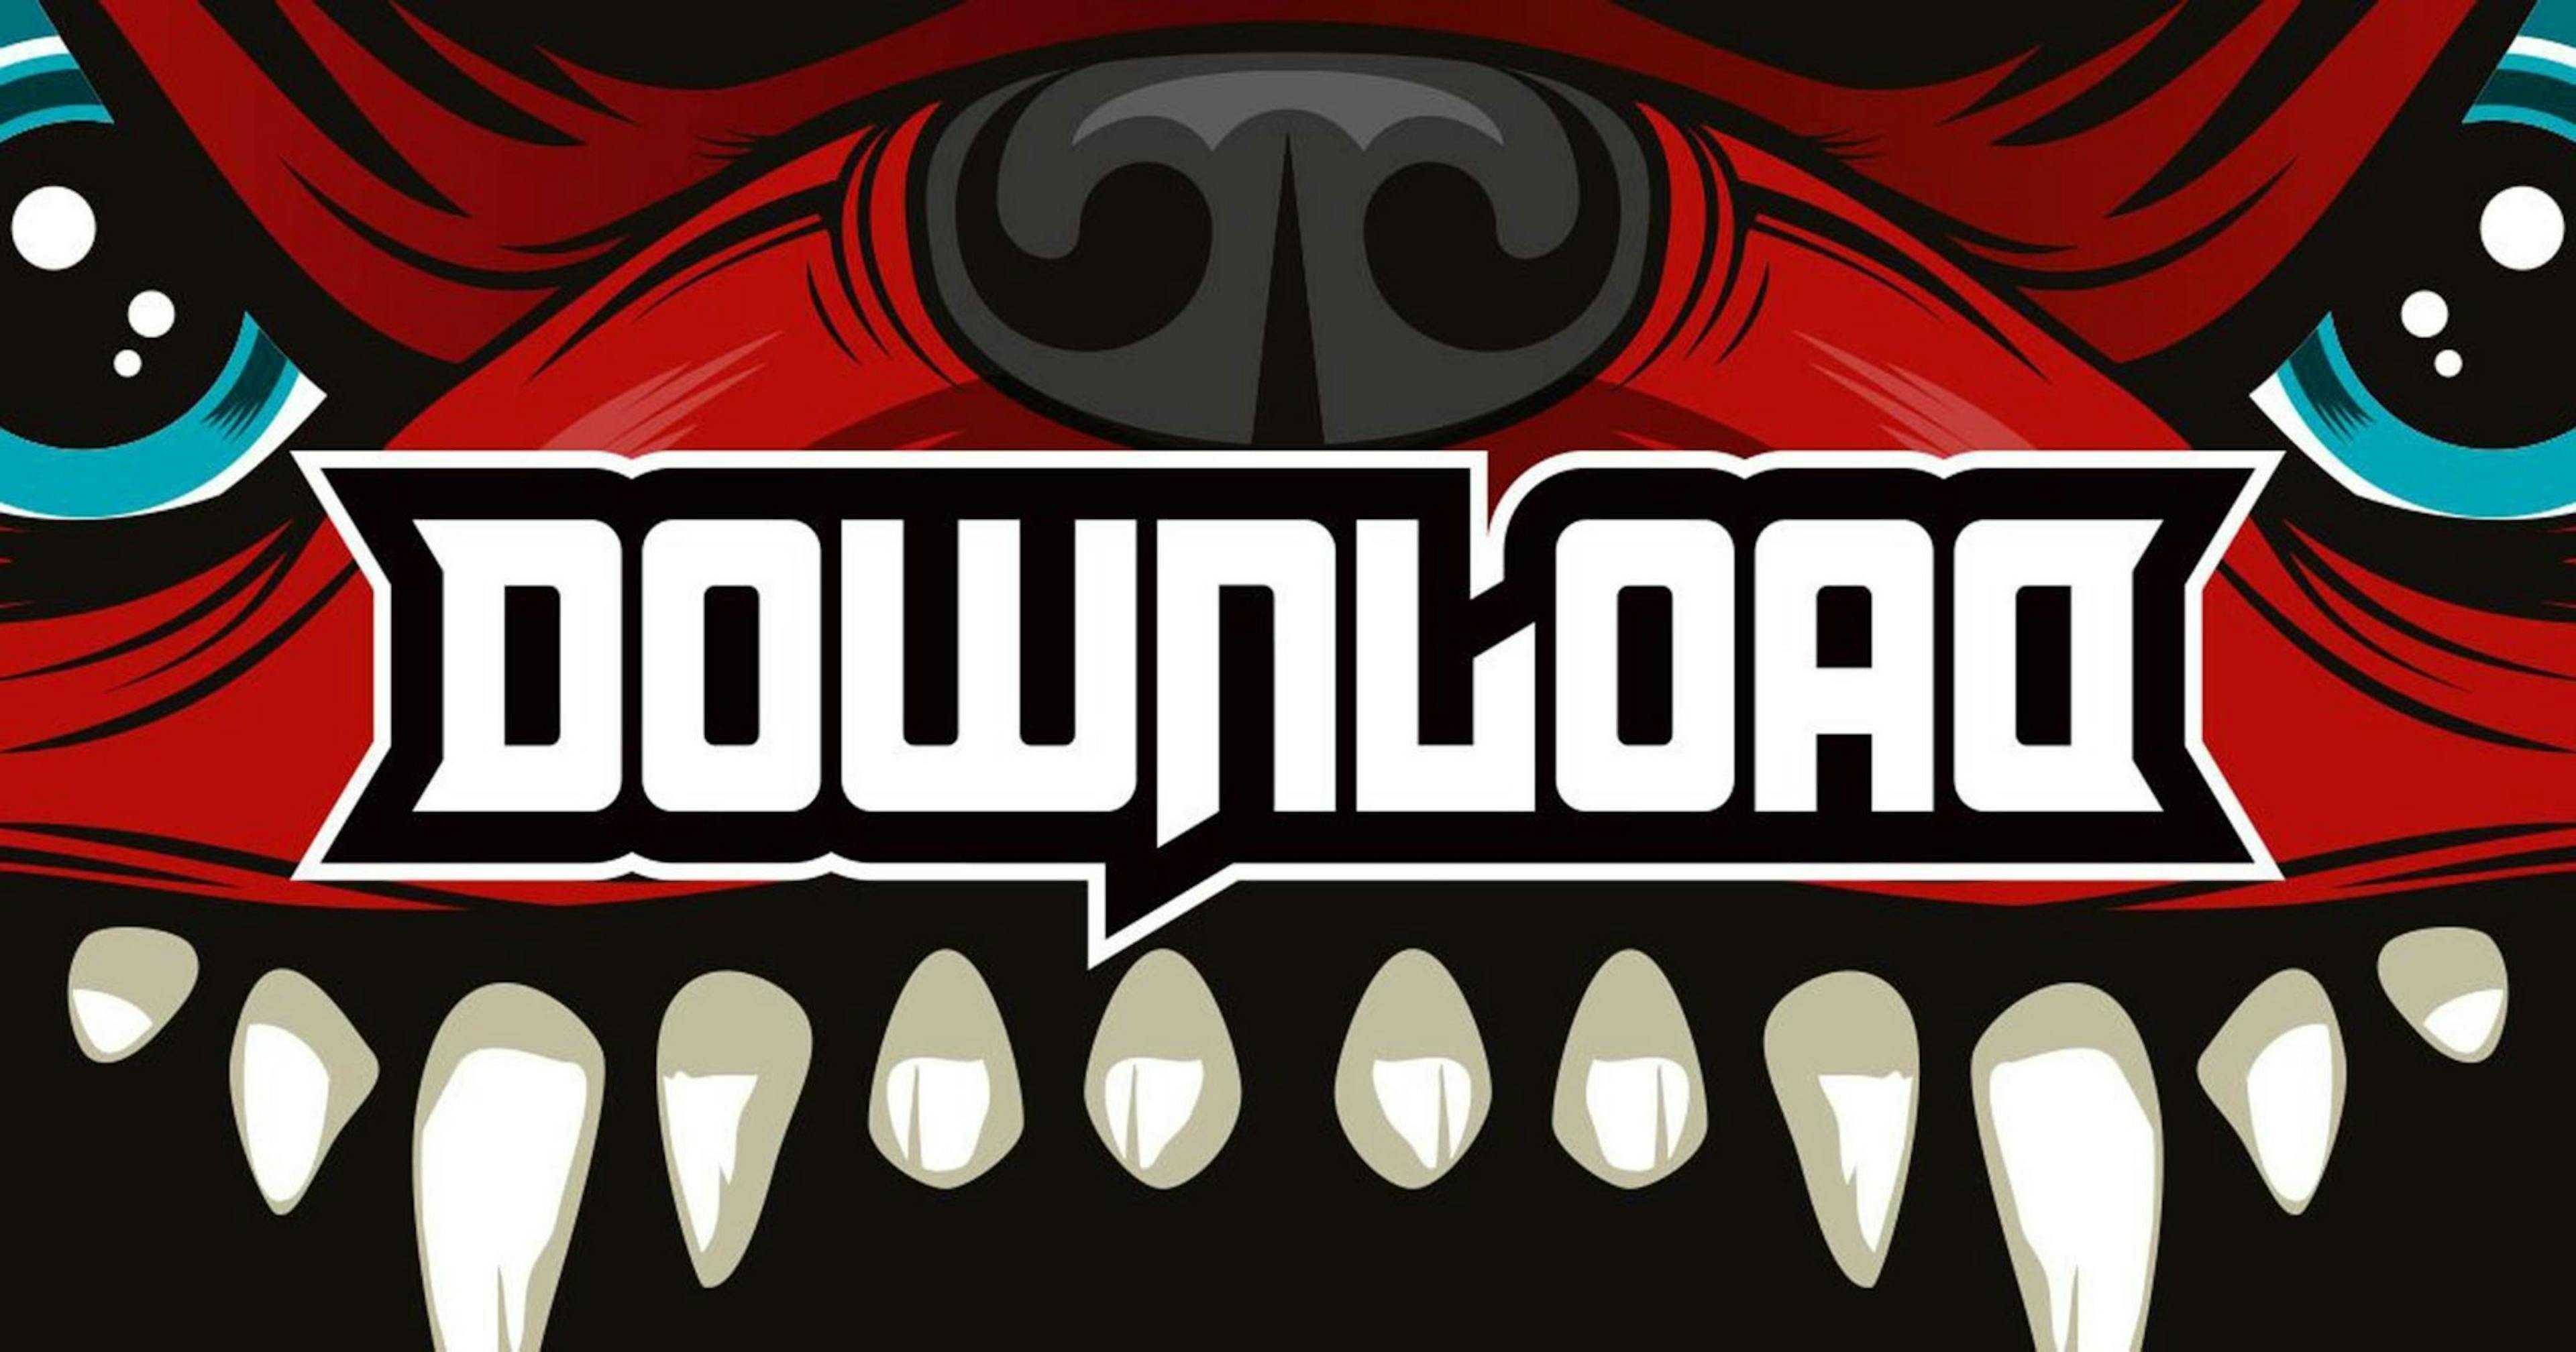 Vote For The Best Download Festival Ever